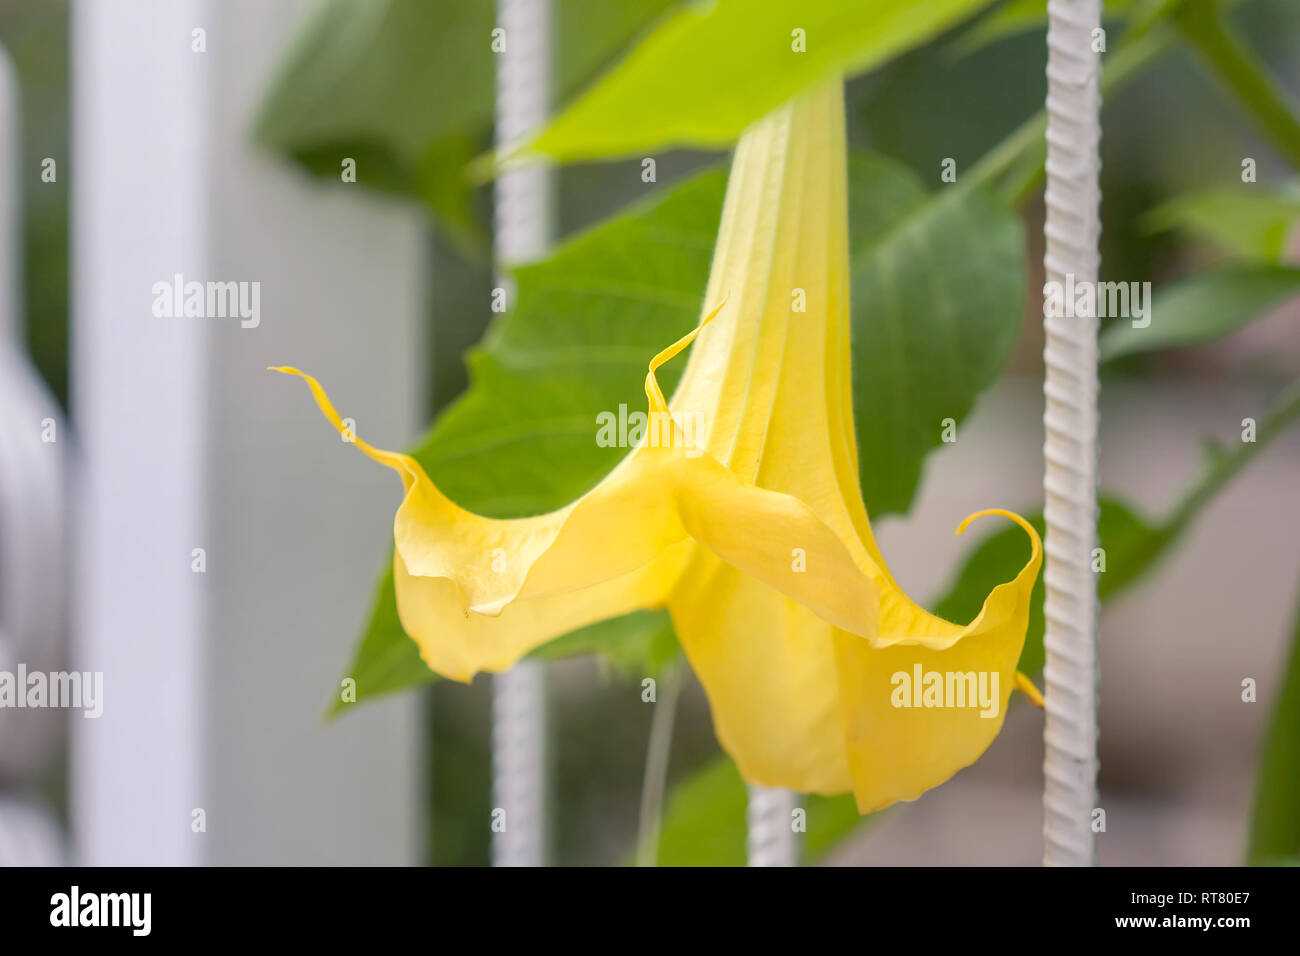 Close-up of yellow flower of angel's trumpet. Stock Photo